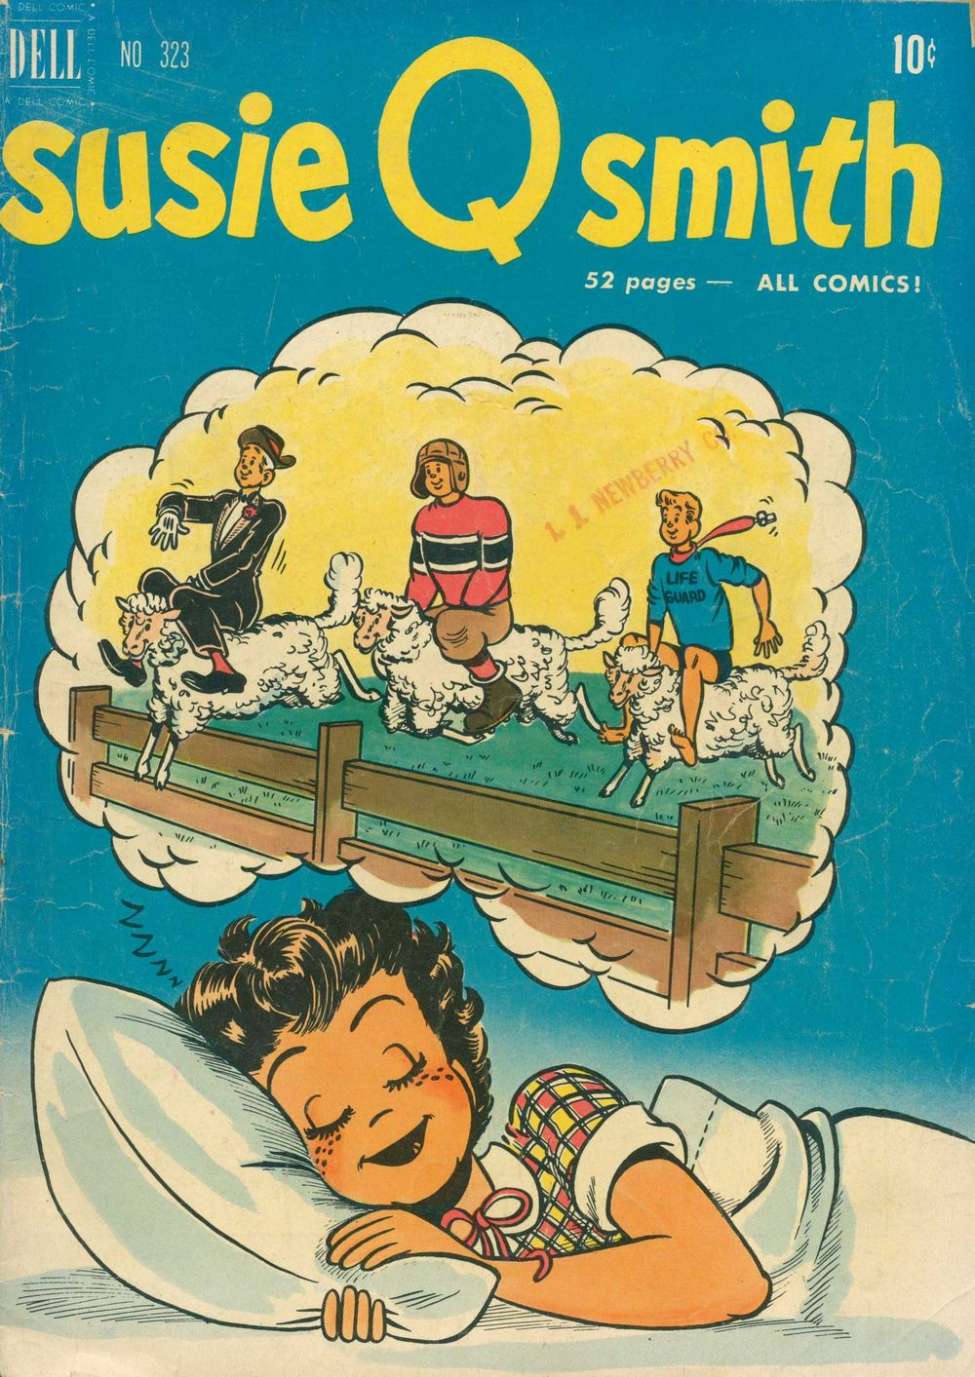 Book Cover For 0323 - Susie Q Smith